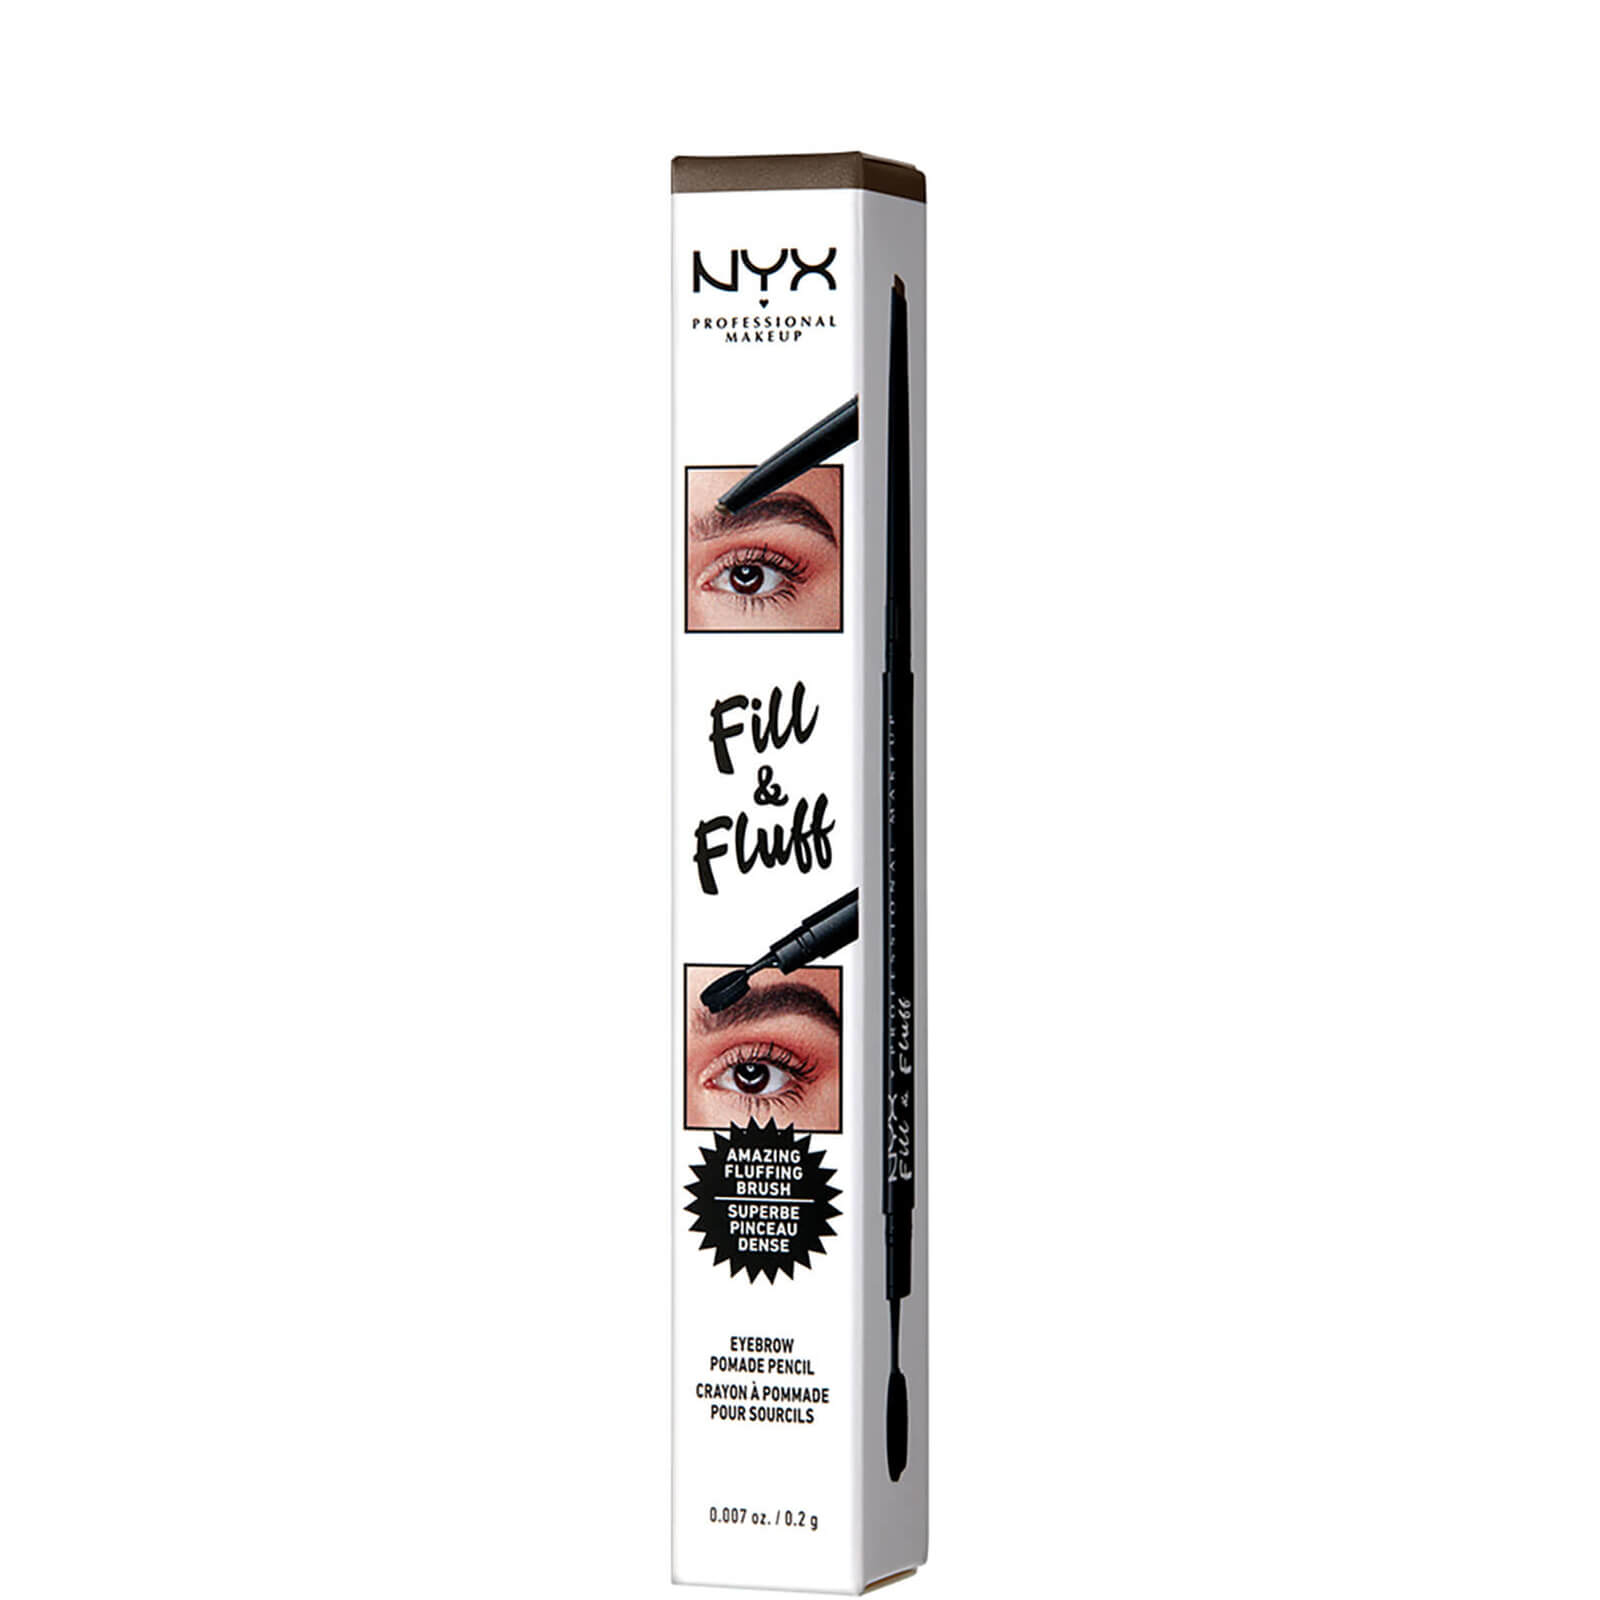 NYX Professional Makeup Fill and Fluff Eyebrow Pomade Pencil 0.2g (Various Shades) - Ash Brown von NYX Professional Makeup